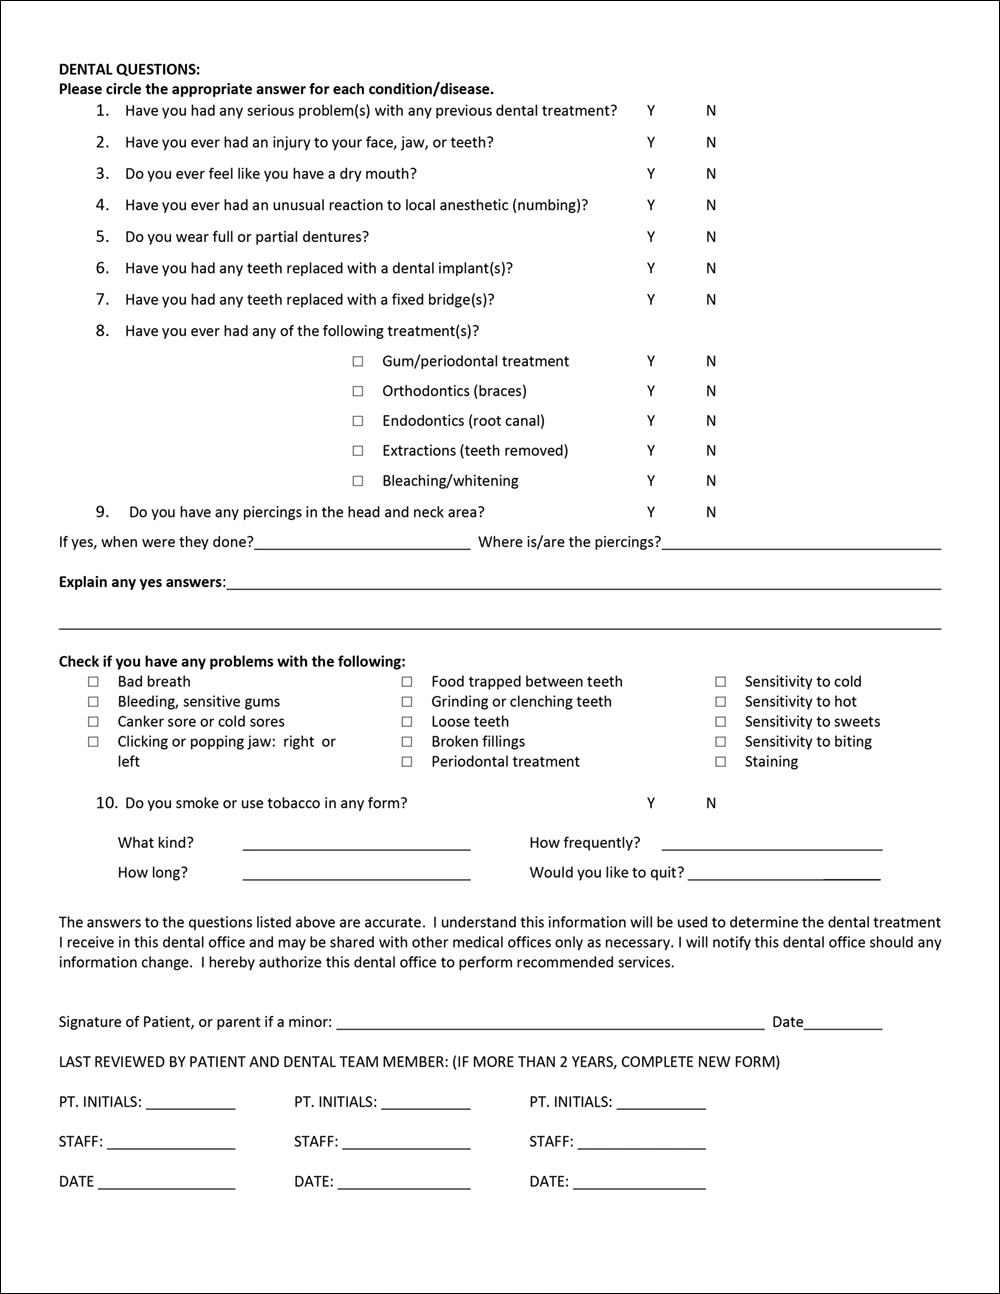 Example of a comprehensive medical and dental form.